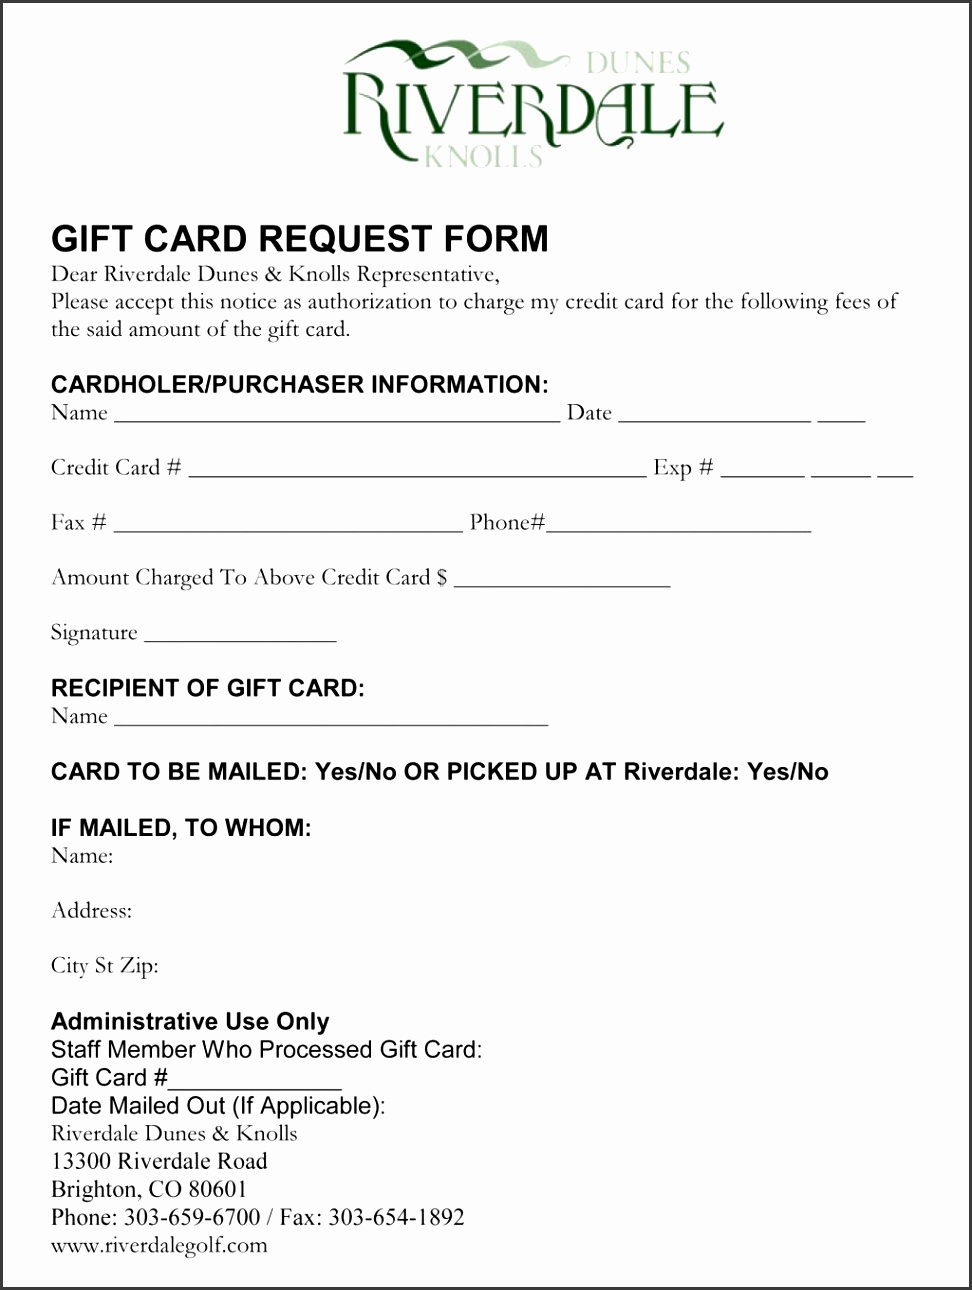 Gift Certificate Request Form Gift Card Request Form Homemade Templatesmas Publisher